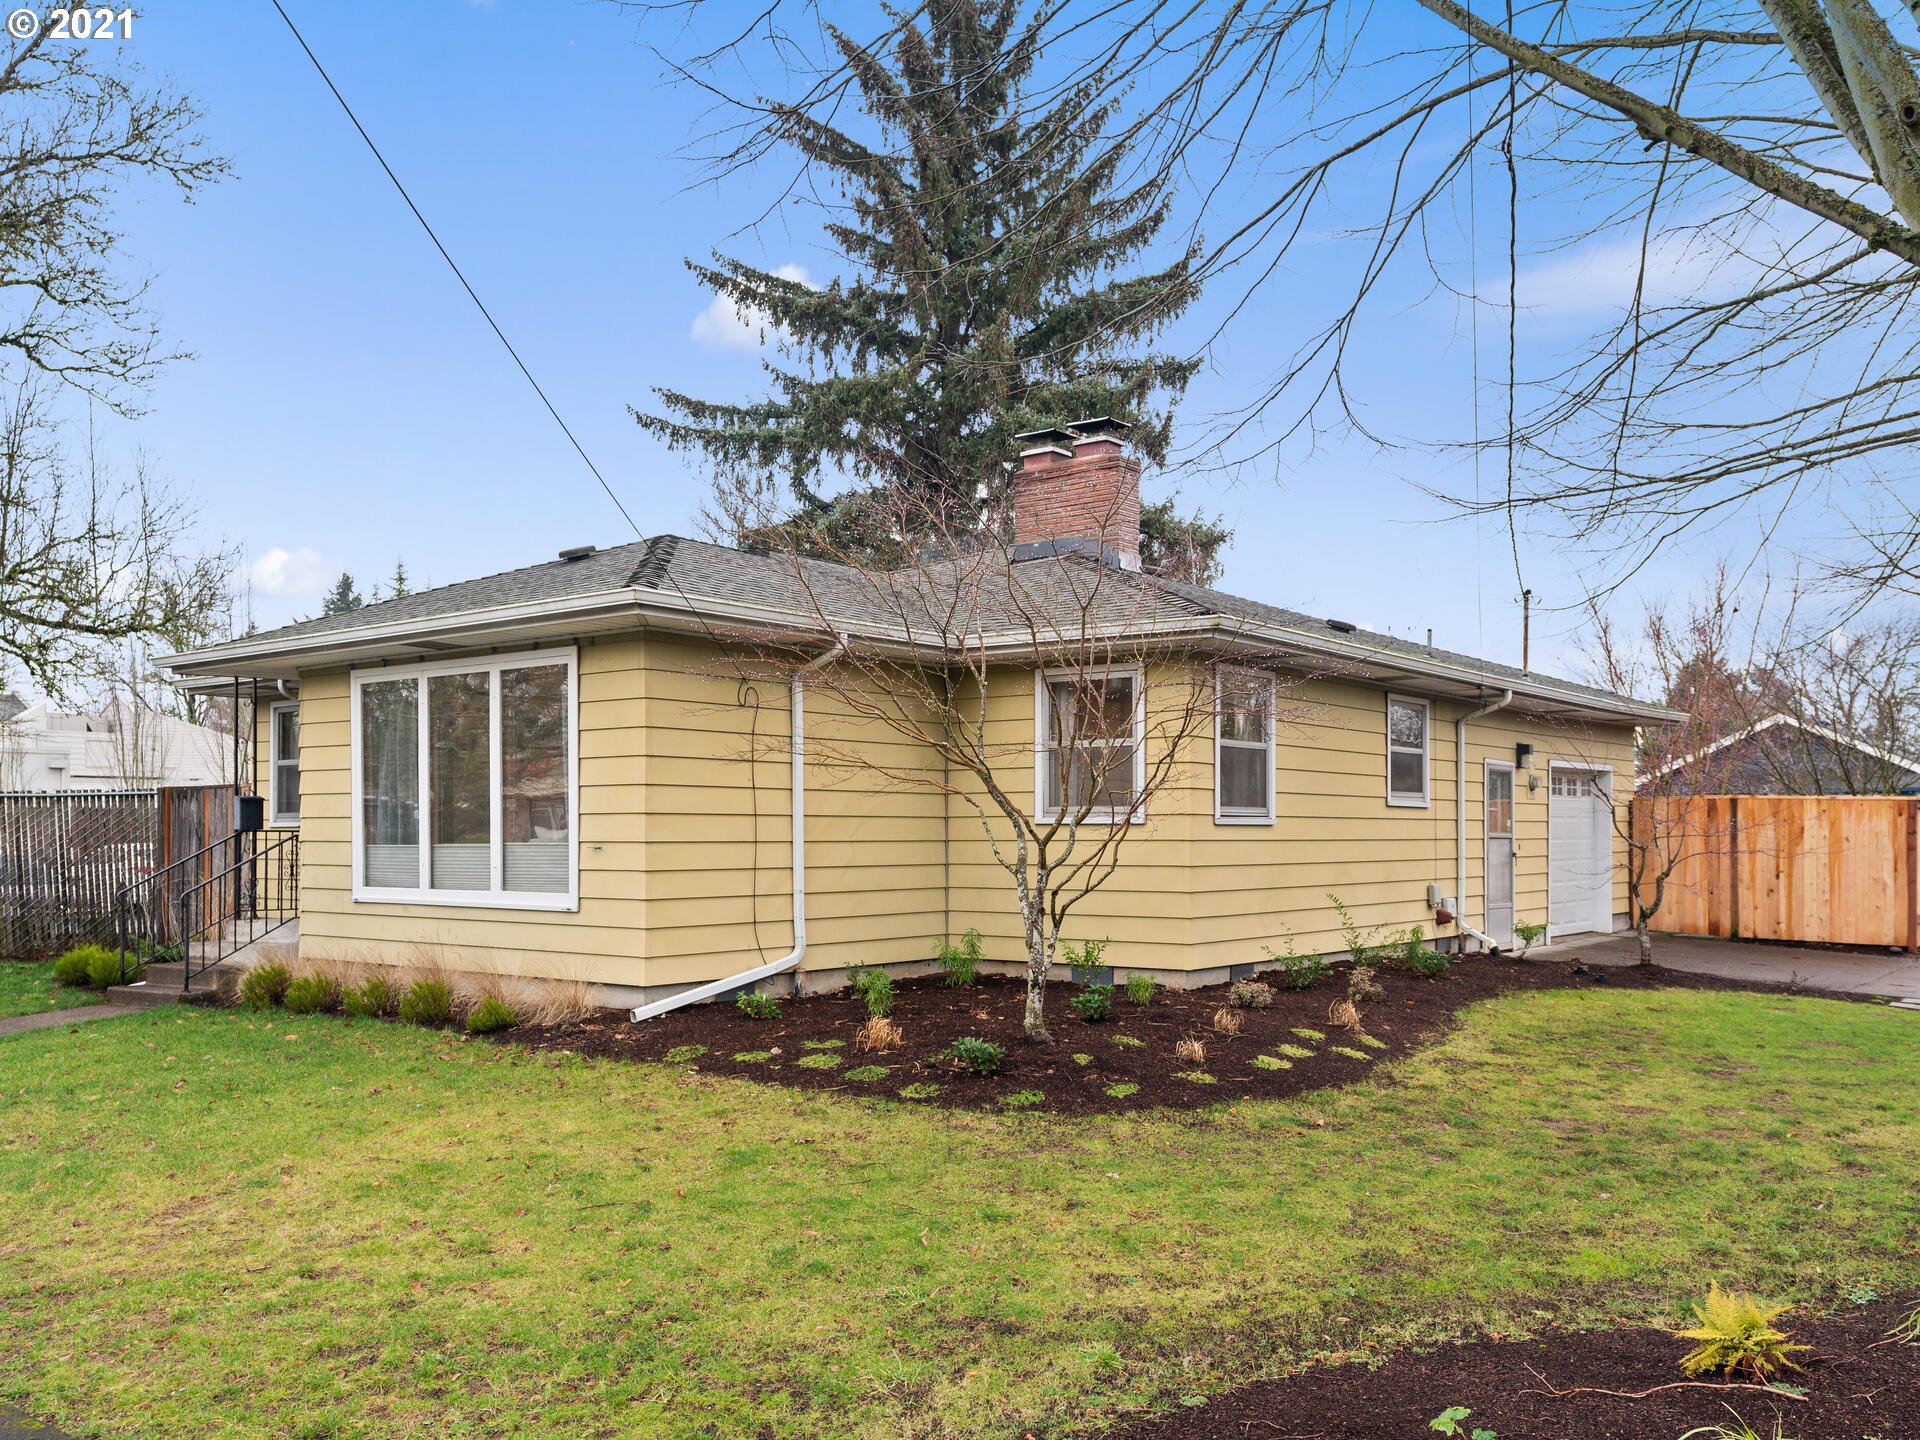 6032 SE 47TH AVE (1 of 32)